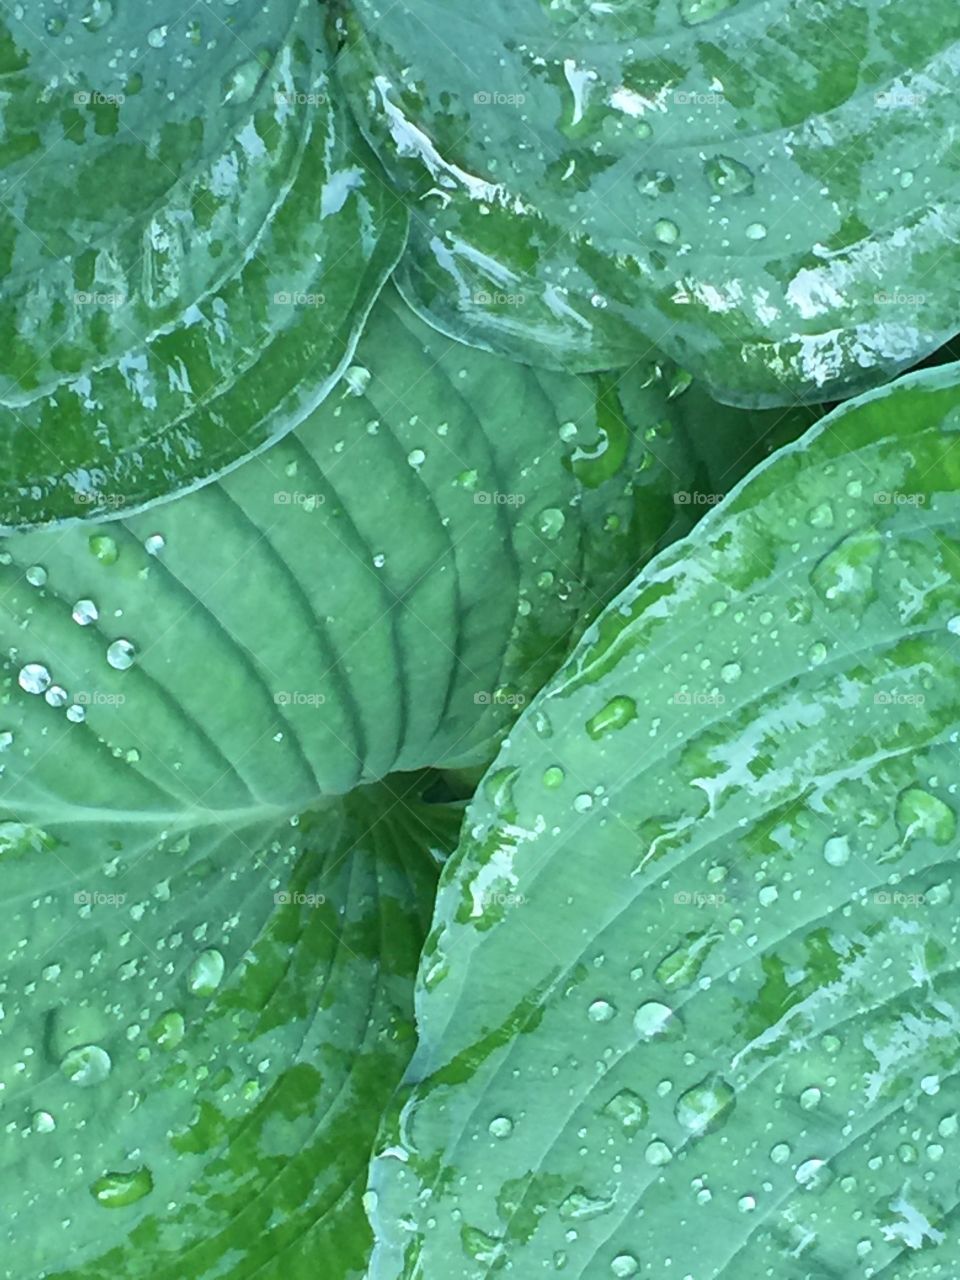 Elephant leaves with raindrops